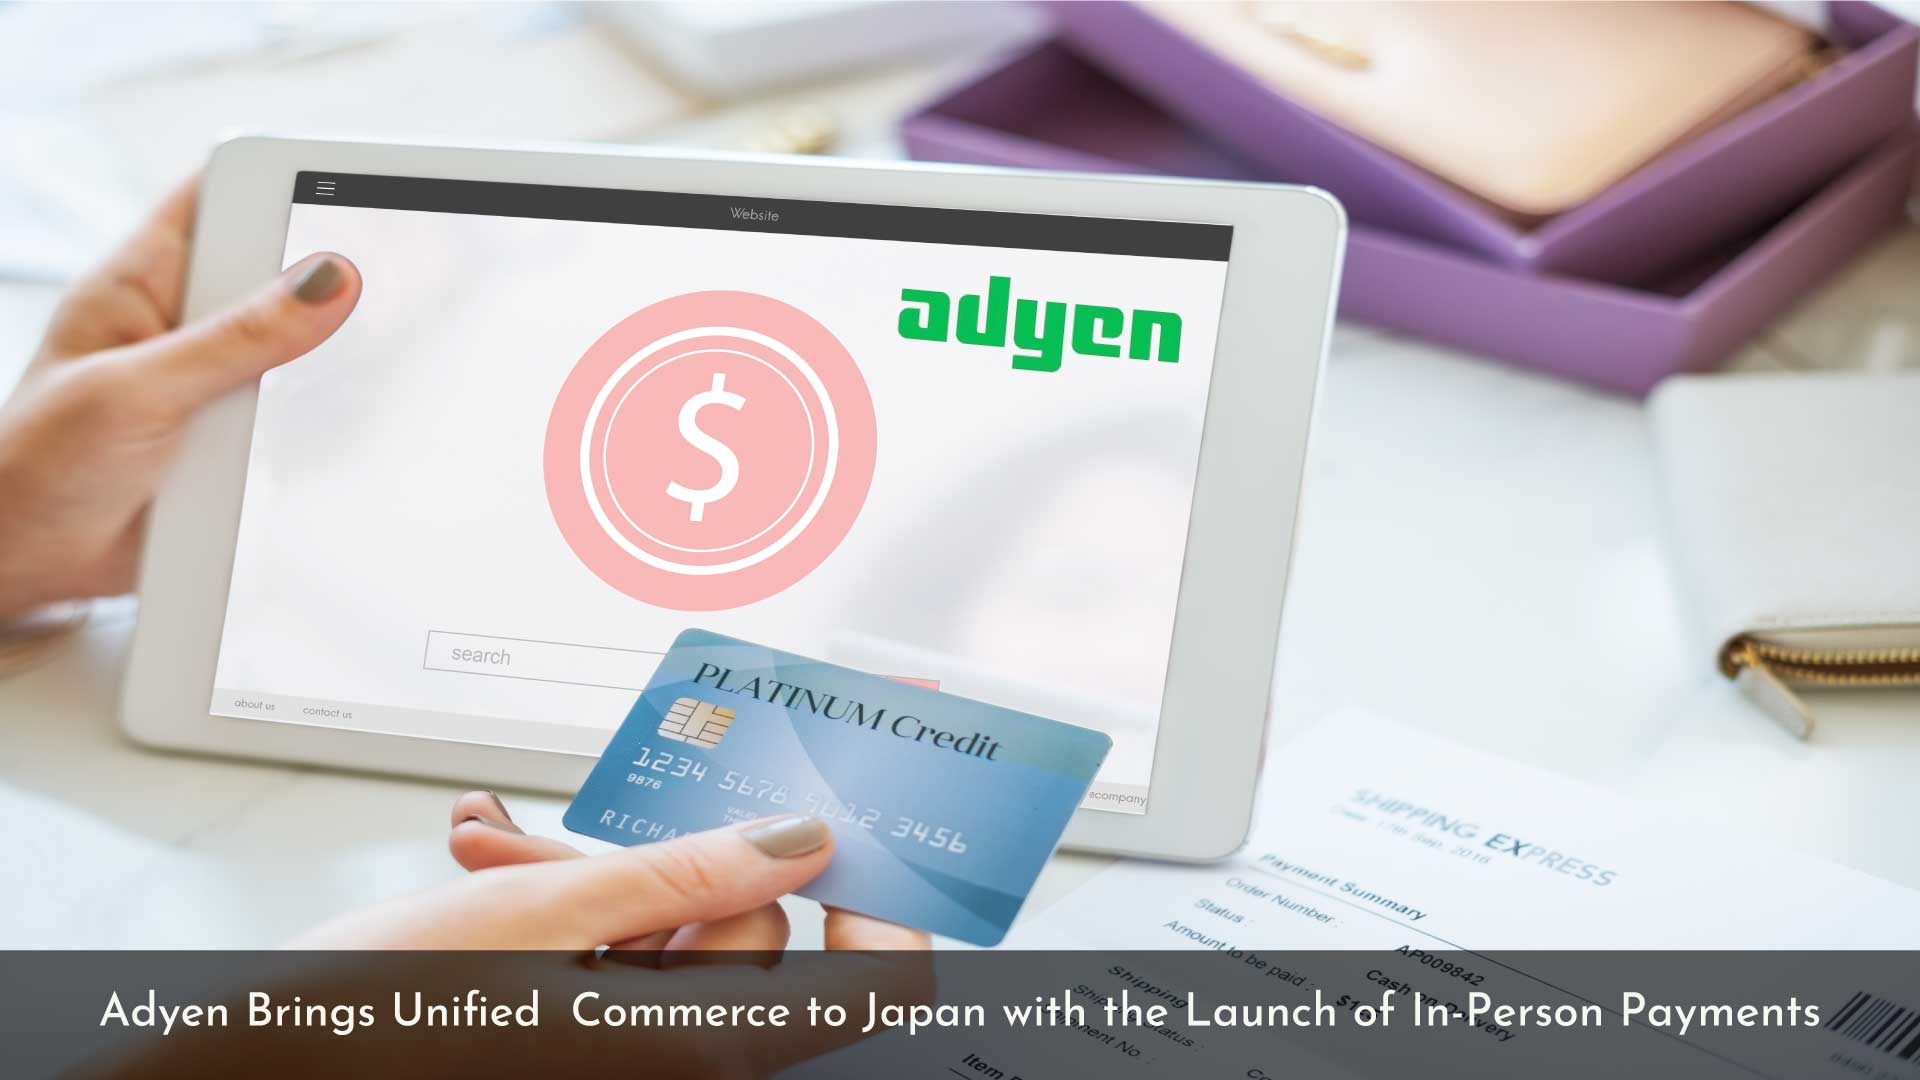 Adyen brings Unified  Commerce to Japan with the Launch of In-Person Payments